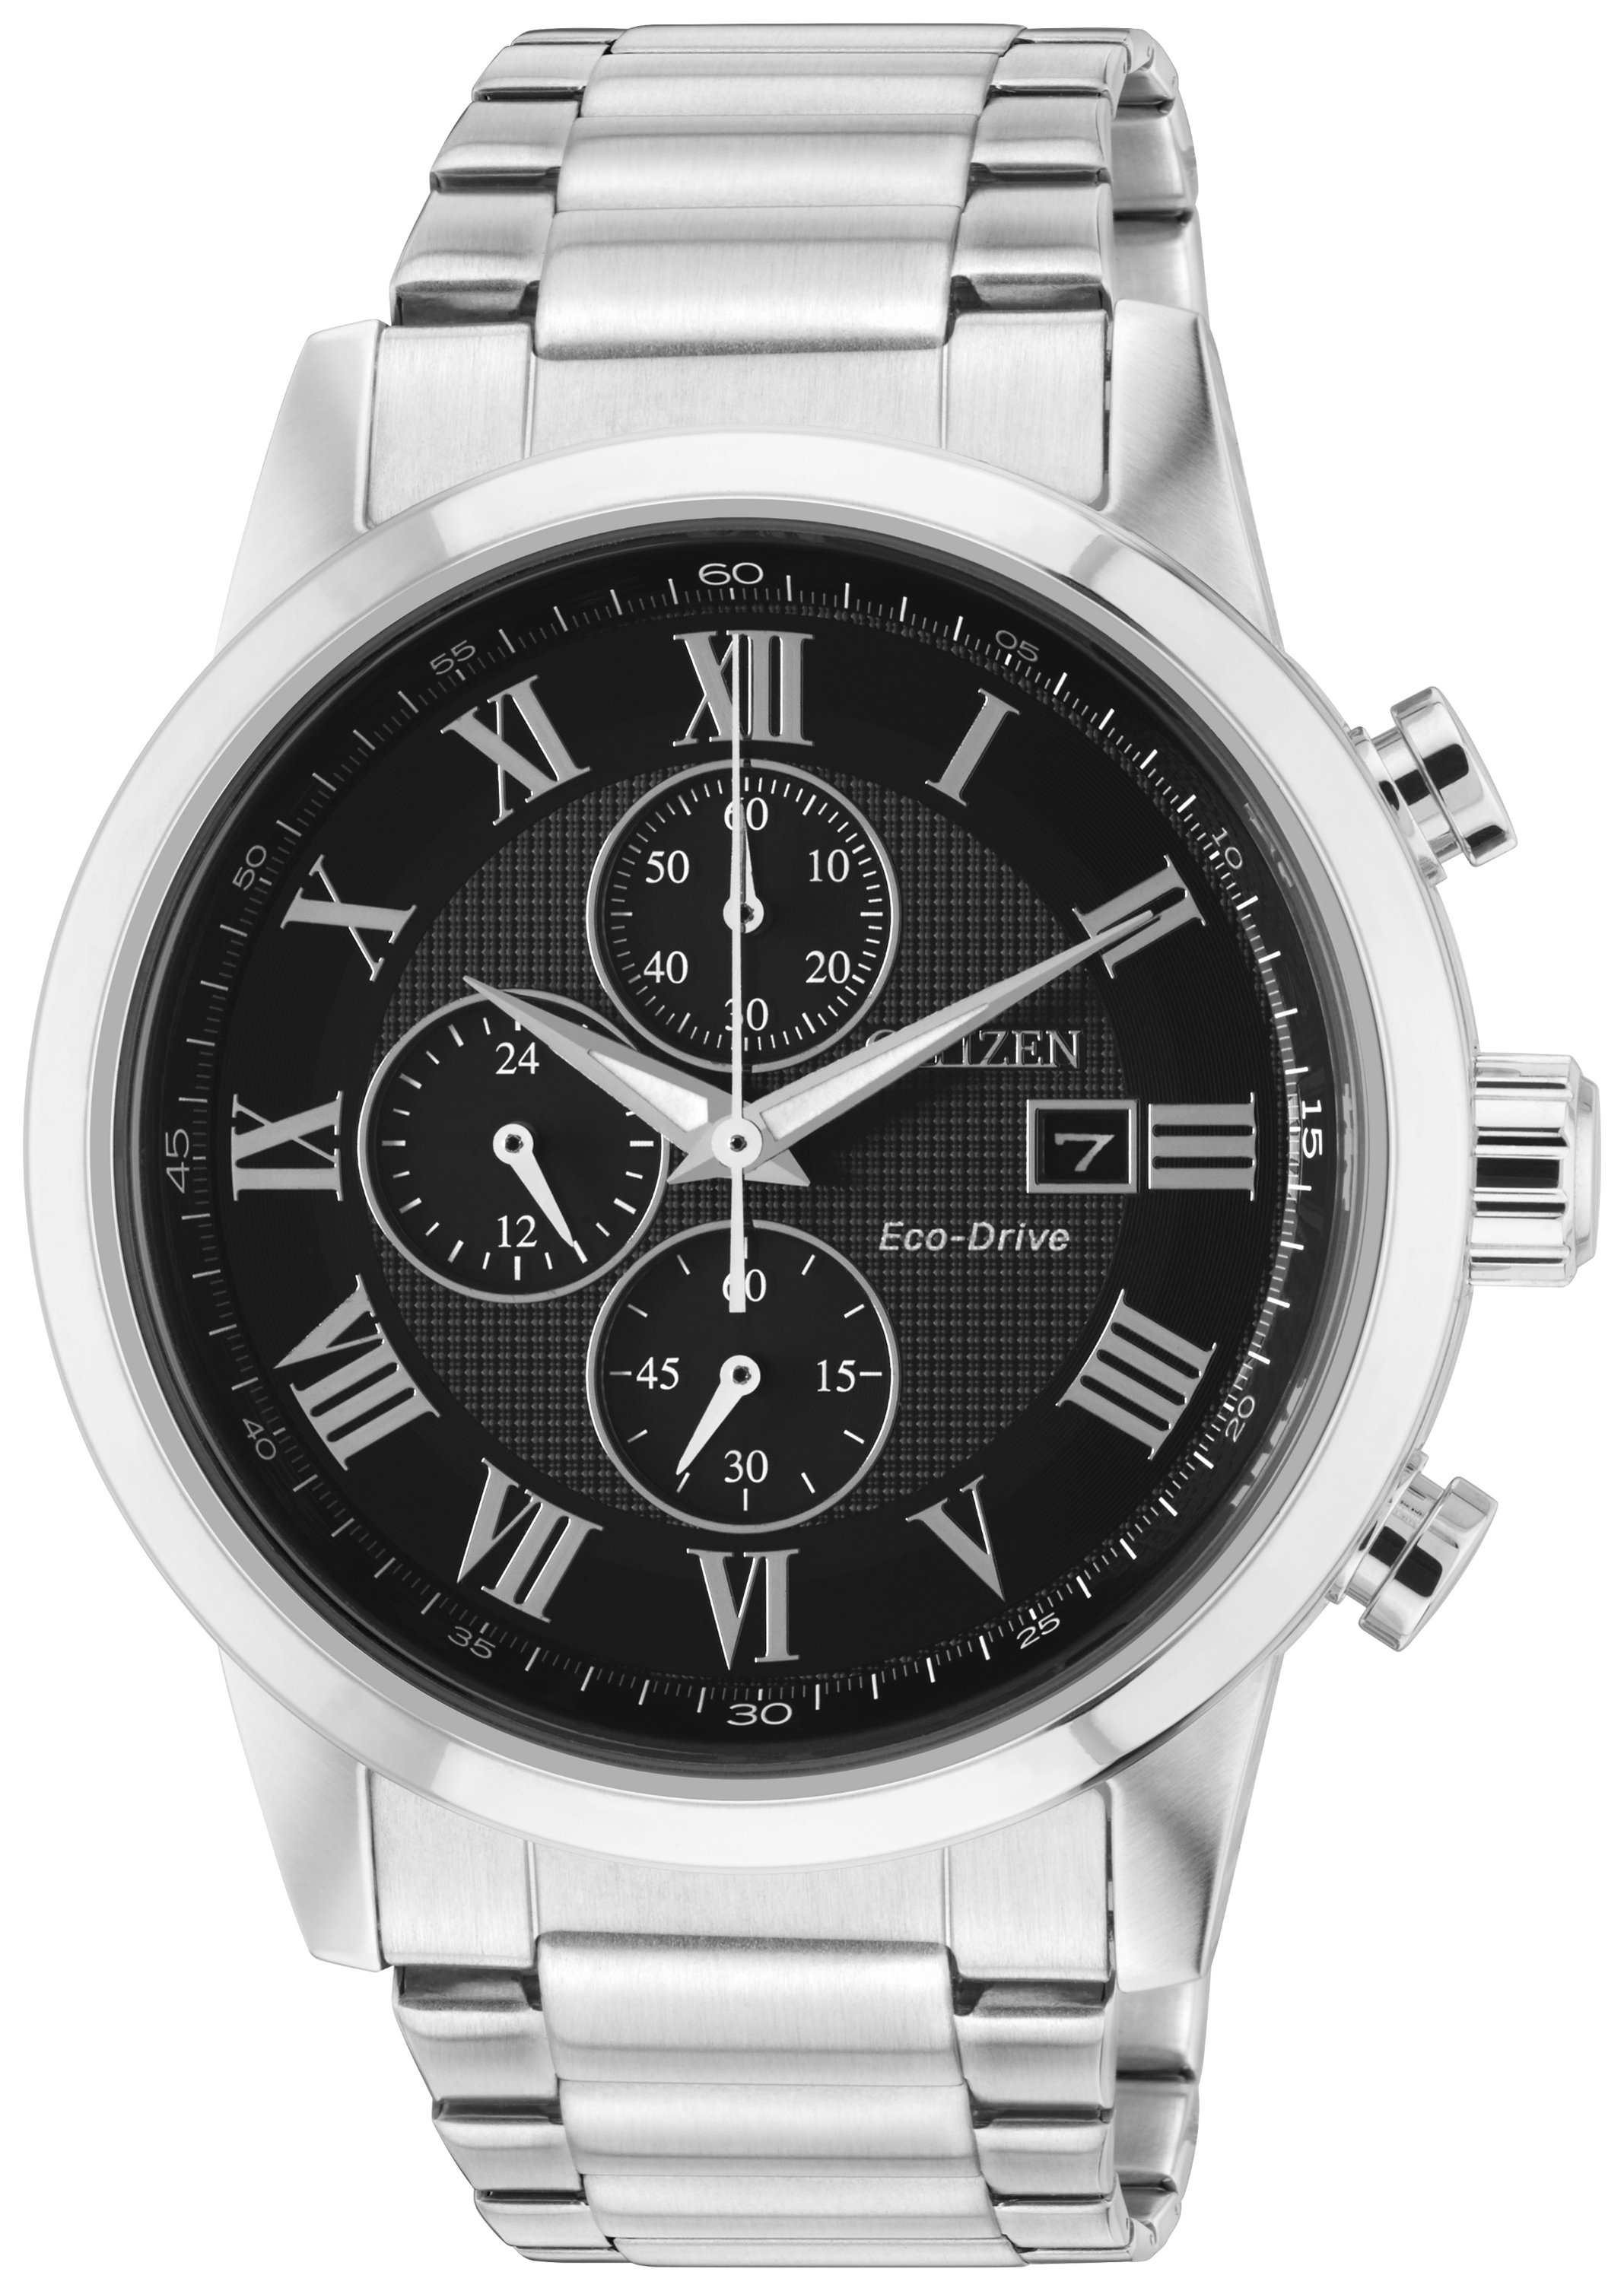 Citizen Men's Chronograph Silver Stainless Steel Watch